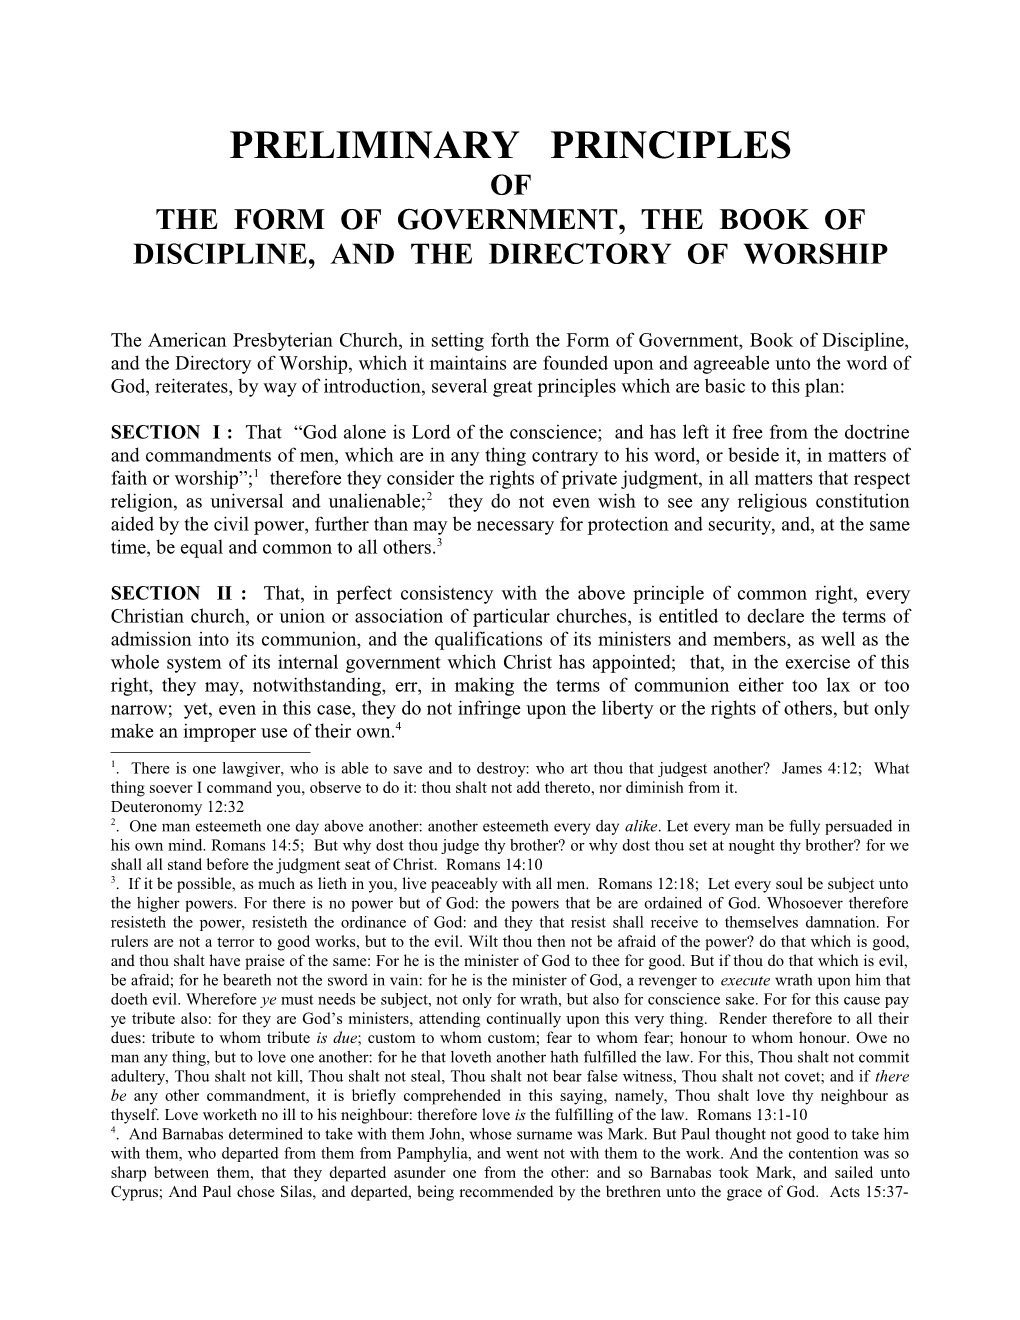 The Form of Government, the Book of Discipline, and the Directory of Worship